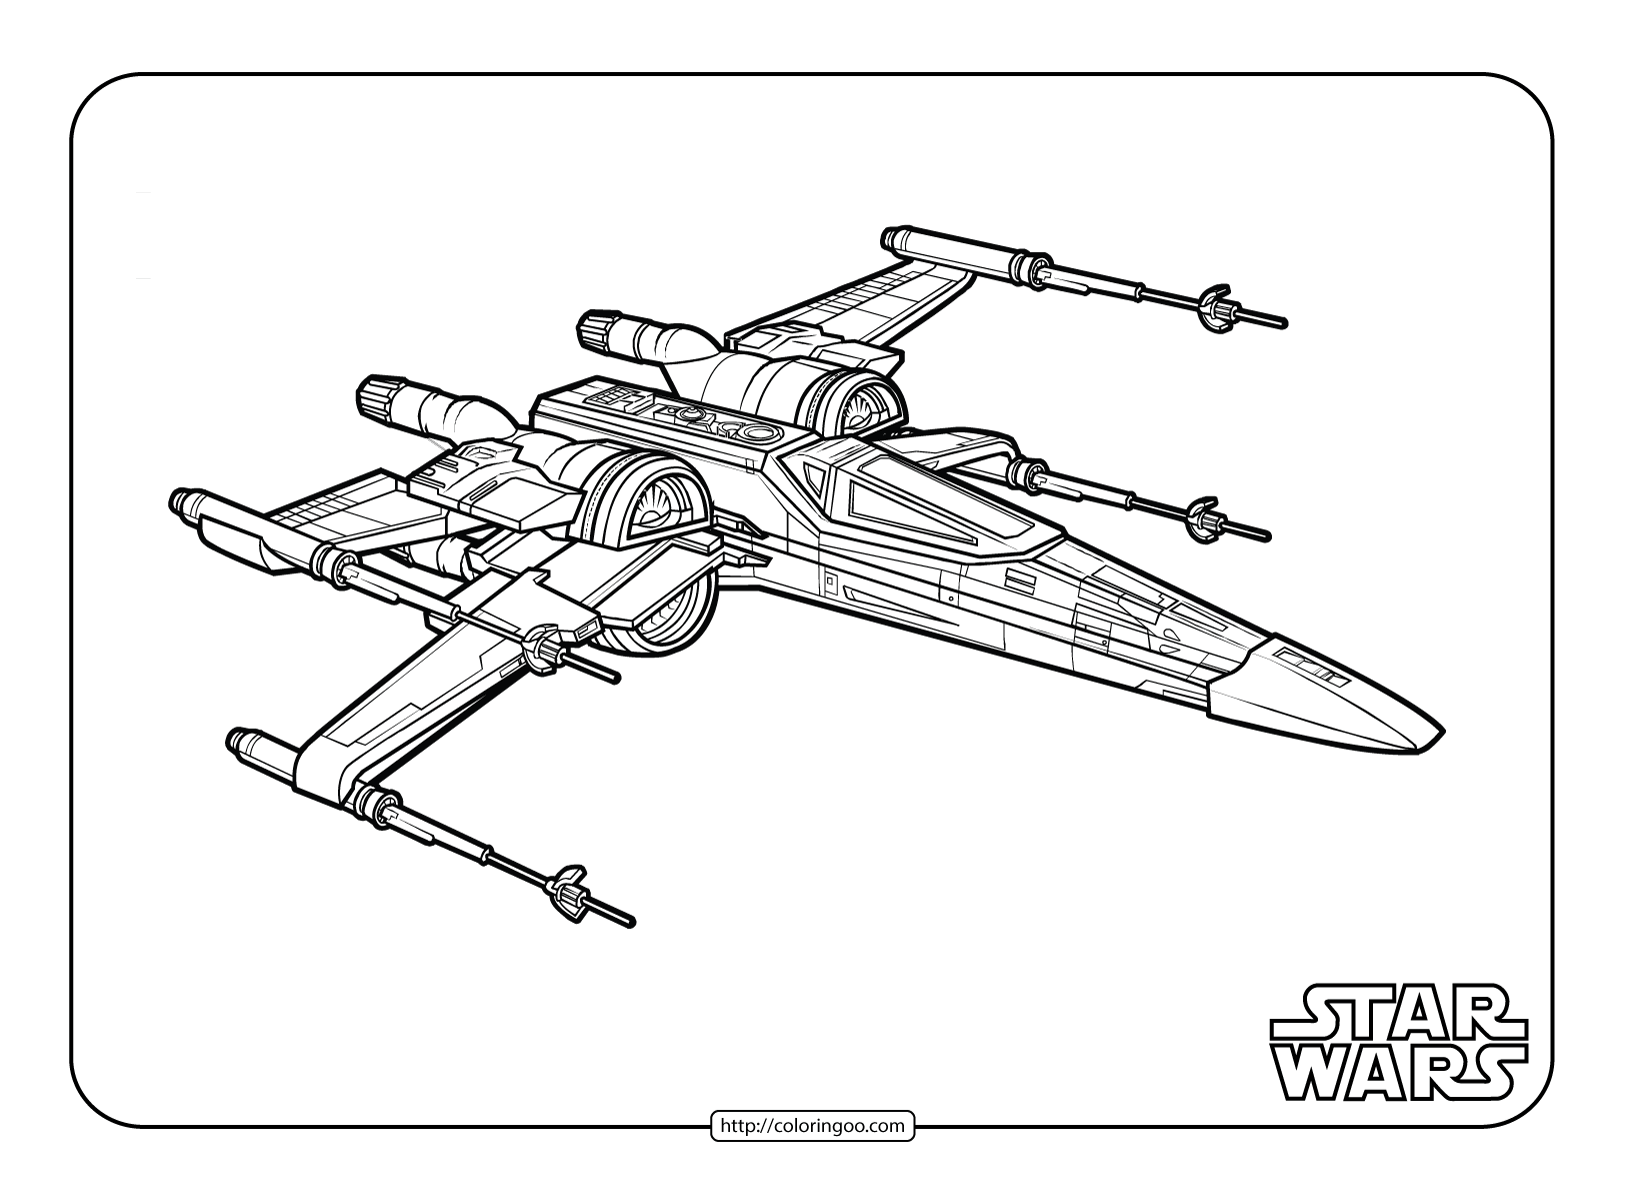 star wars x wing starfighter coloring sheet